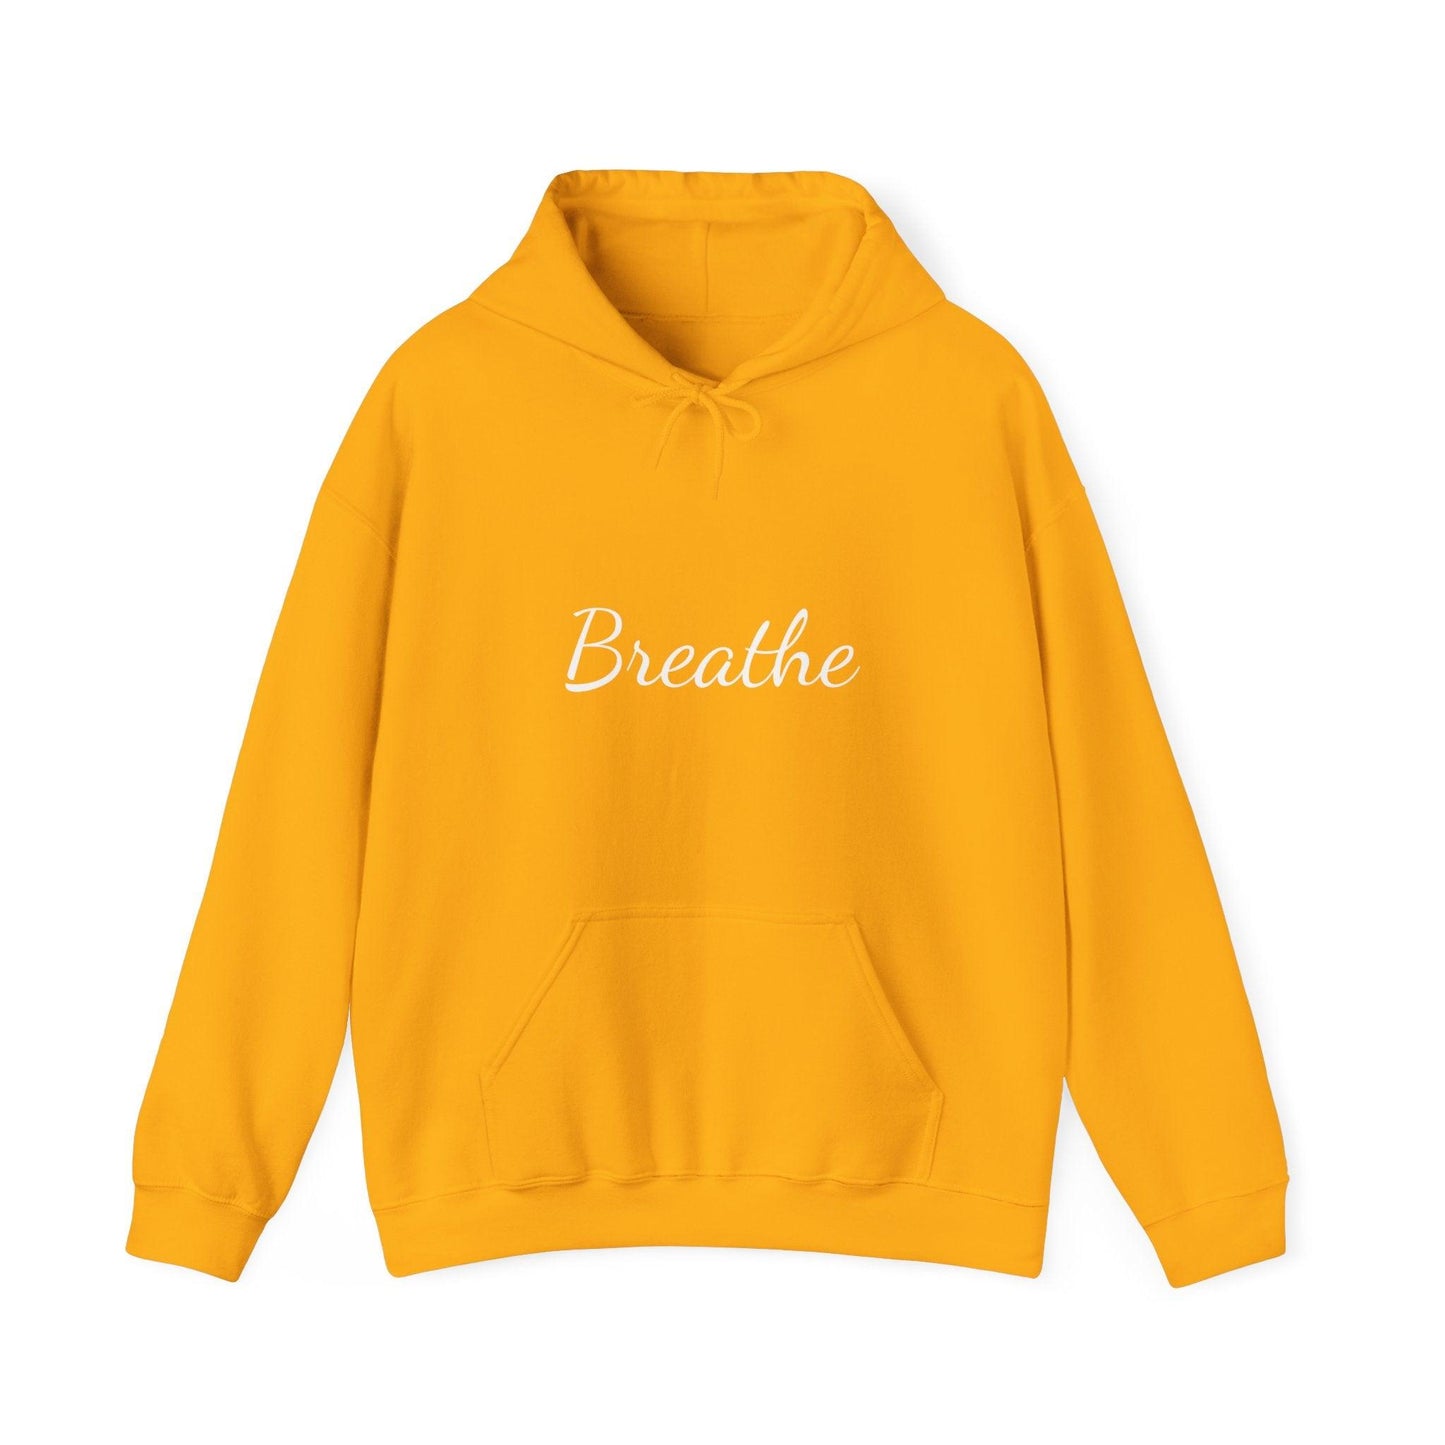 Orange Unisex with White Breathe Logo Hoodie - Perfect for Travel, Meditation, Mindfulness and daily wear.